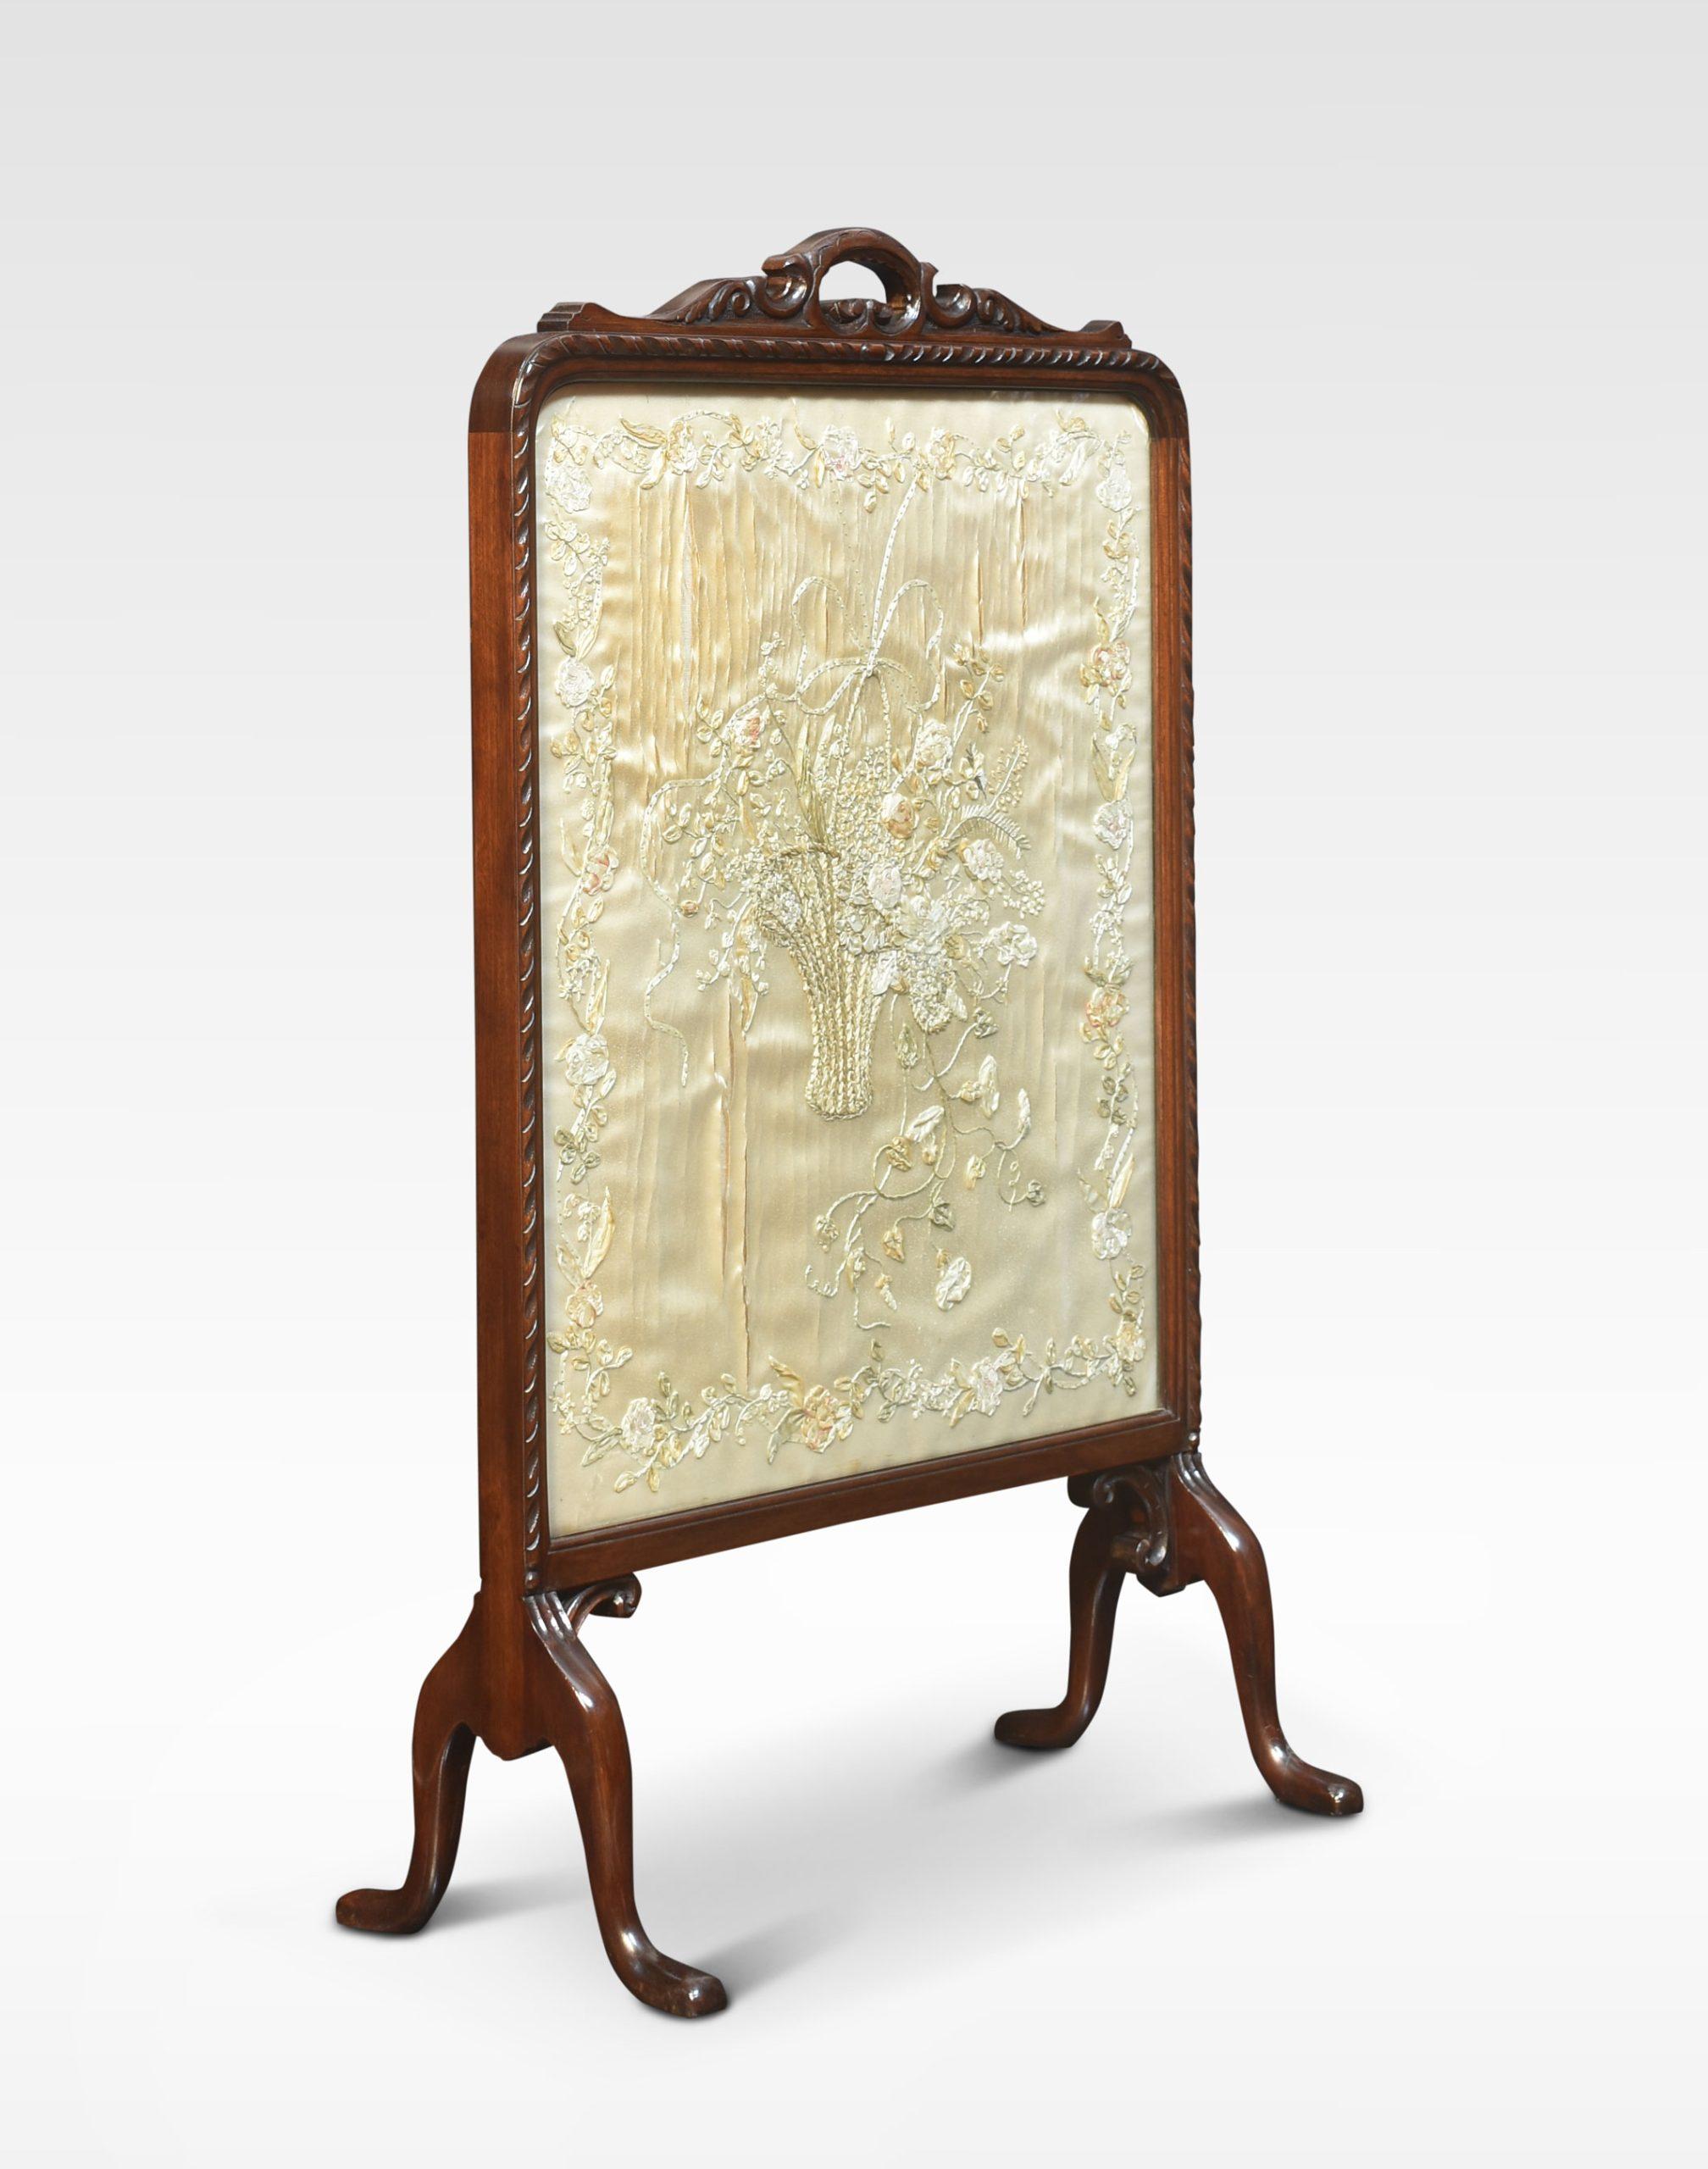 Mahogany framed fire screen, and the carved mahogany Frame encasing needlework panel all raised up on shaped supports. Some damage to the needlework panel.
Dimensions
Height 34.5 Inches
Width 22 Inches
Depth 10 Inches